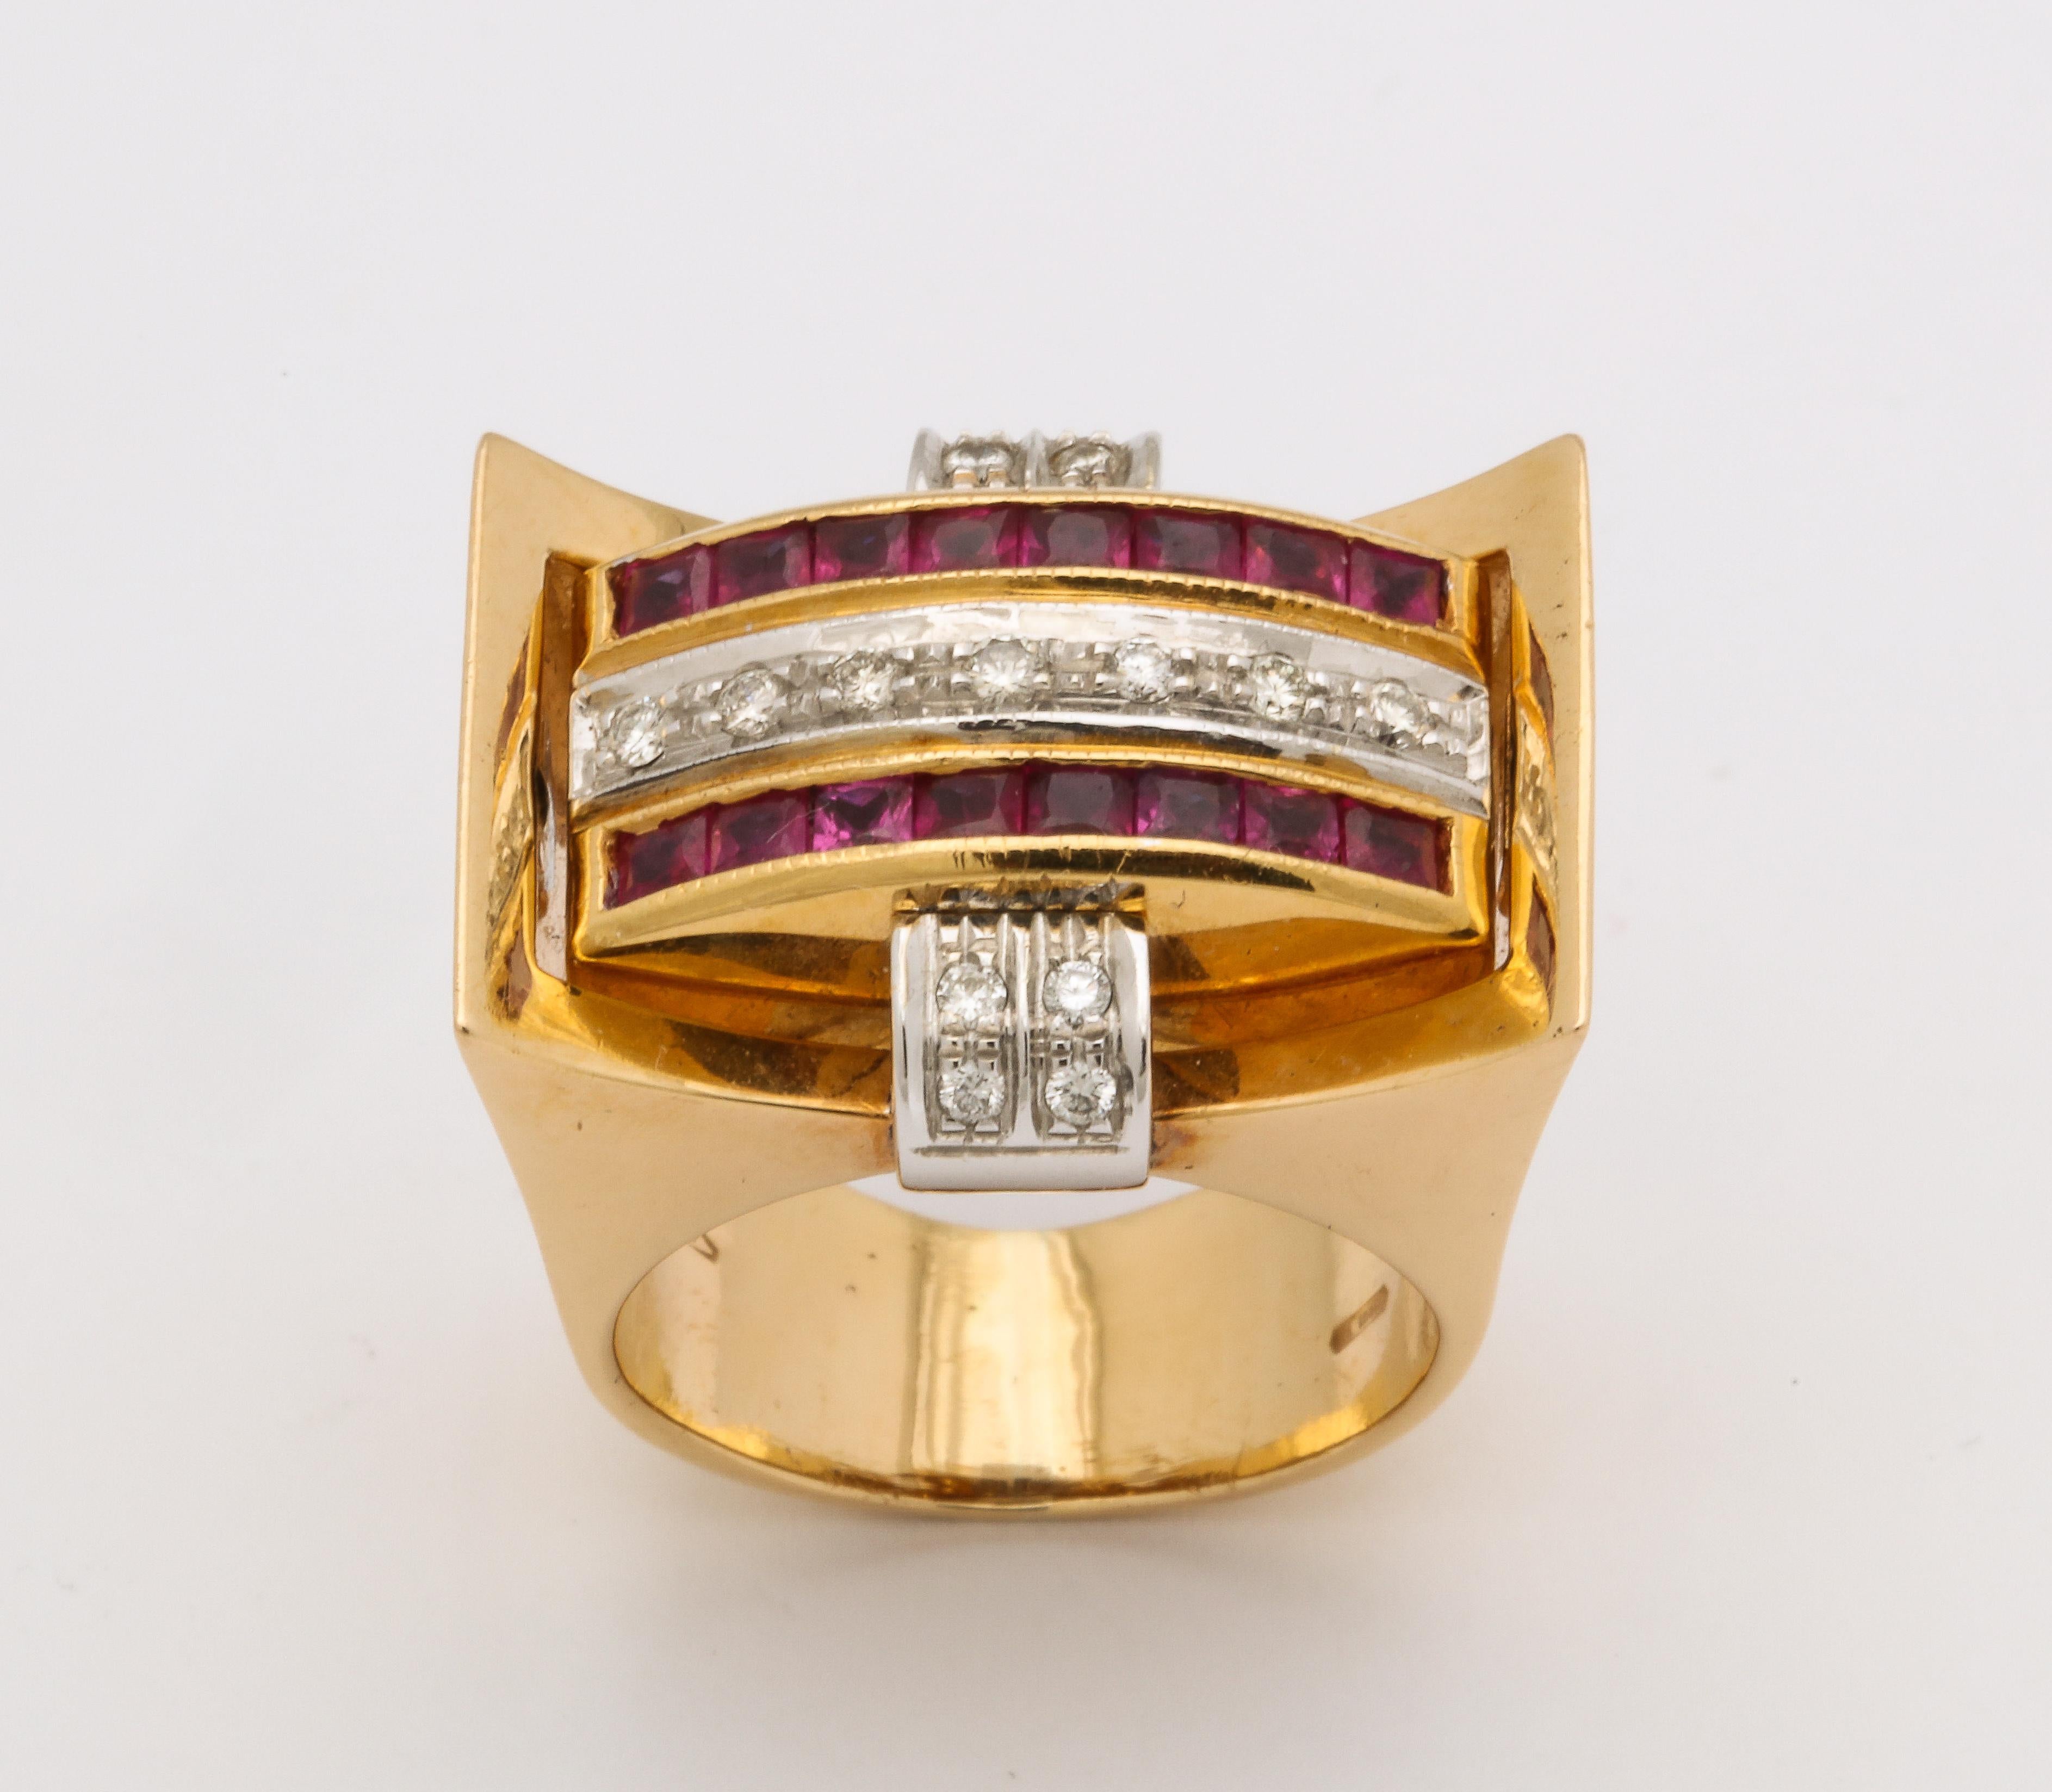 A unique period Retro 18 kt Gold Flip Sapphire/ Ruby and Diamond Ring. The ring can be worn with the sapphires and diamonds   or the rubies and diamonds showing.  The ring is 
fine quality  and design.